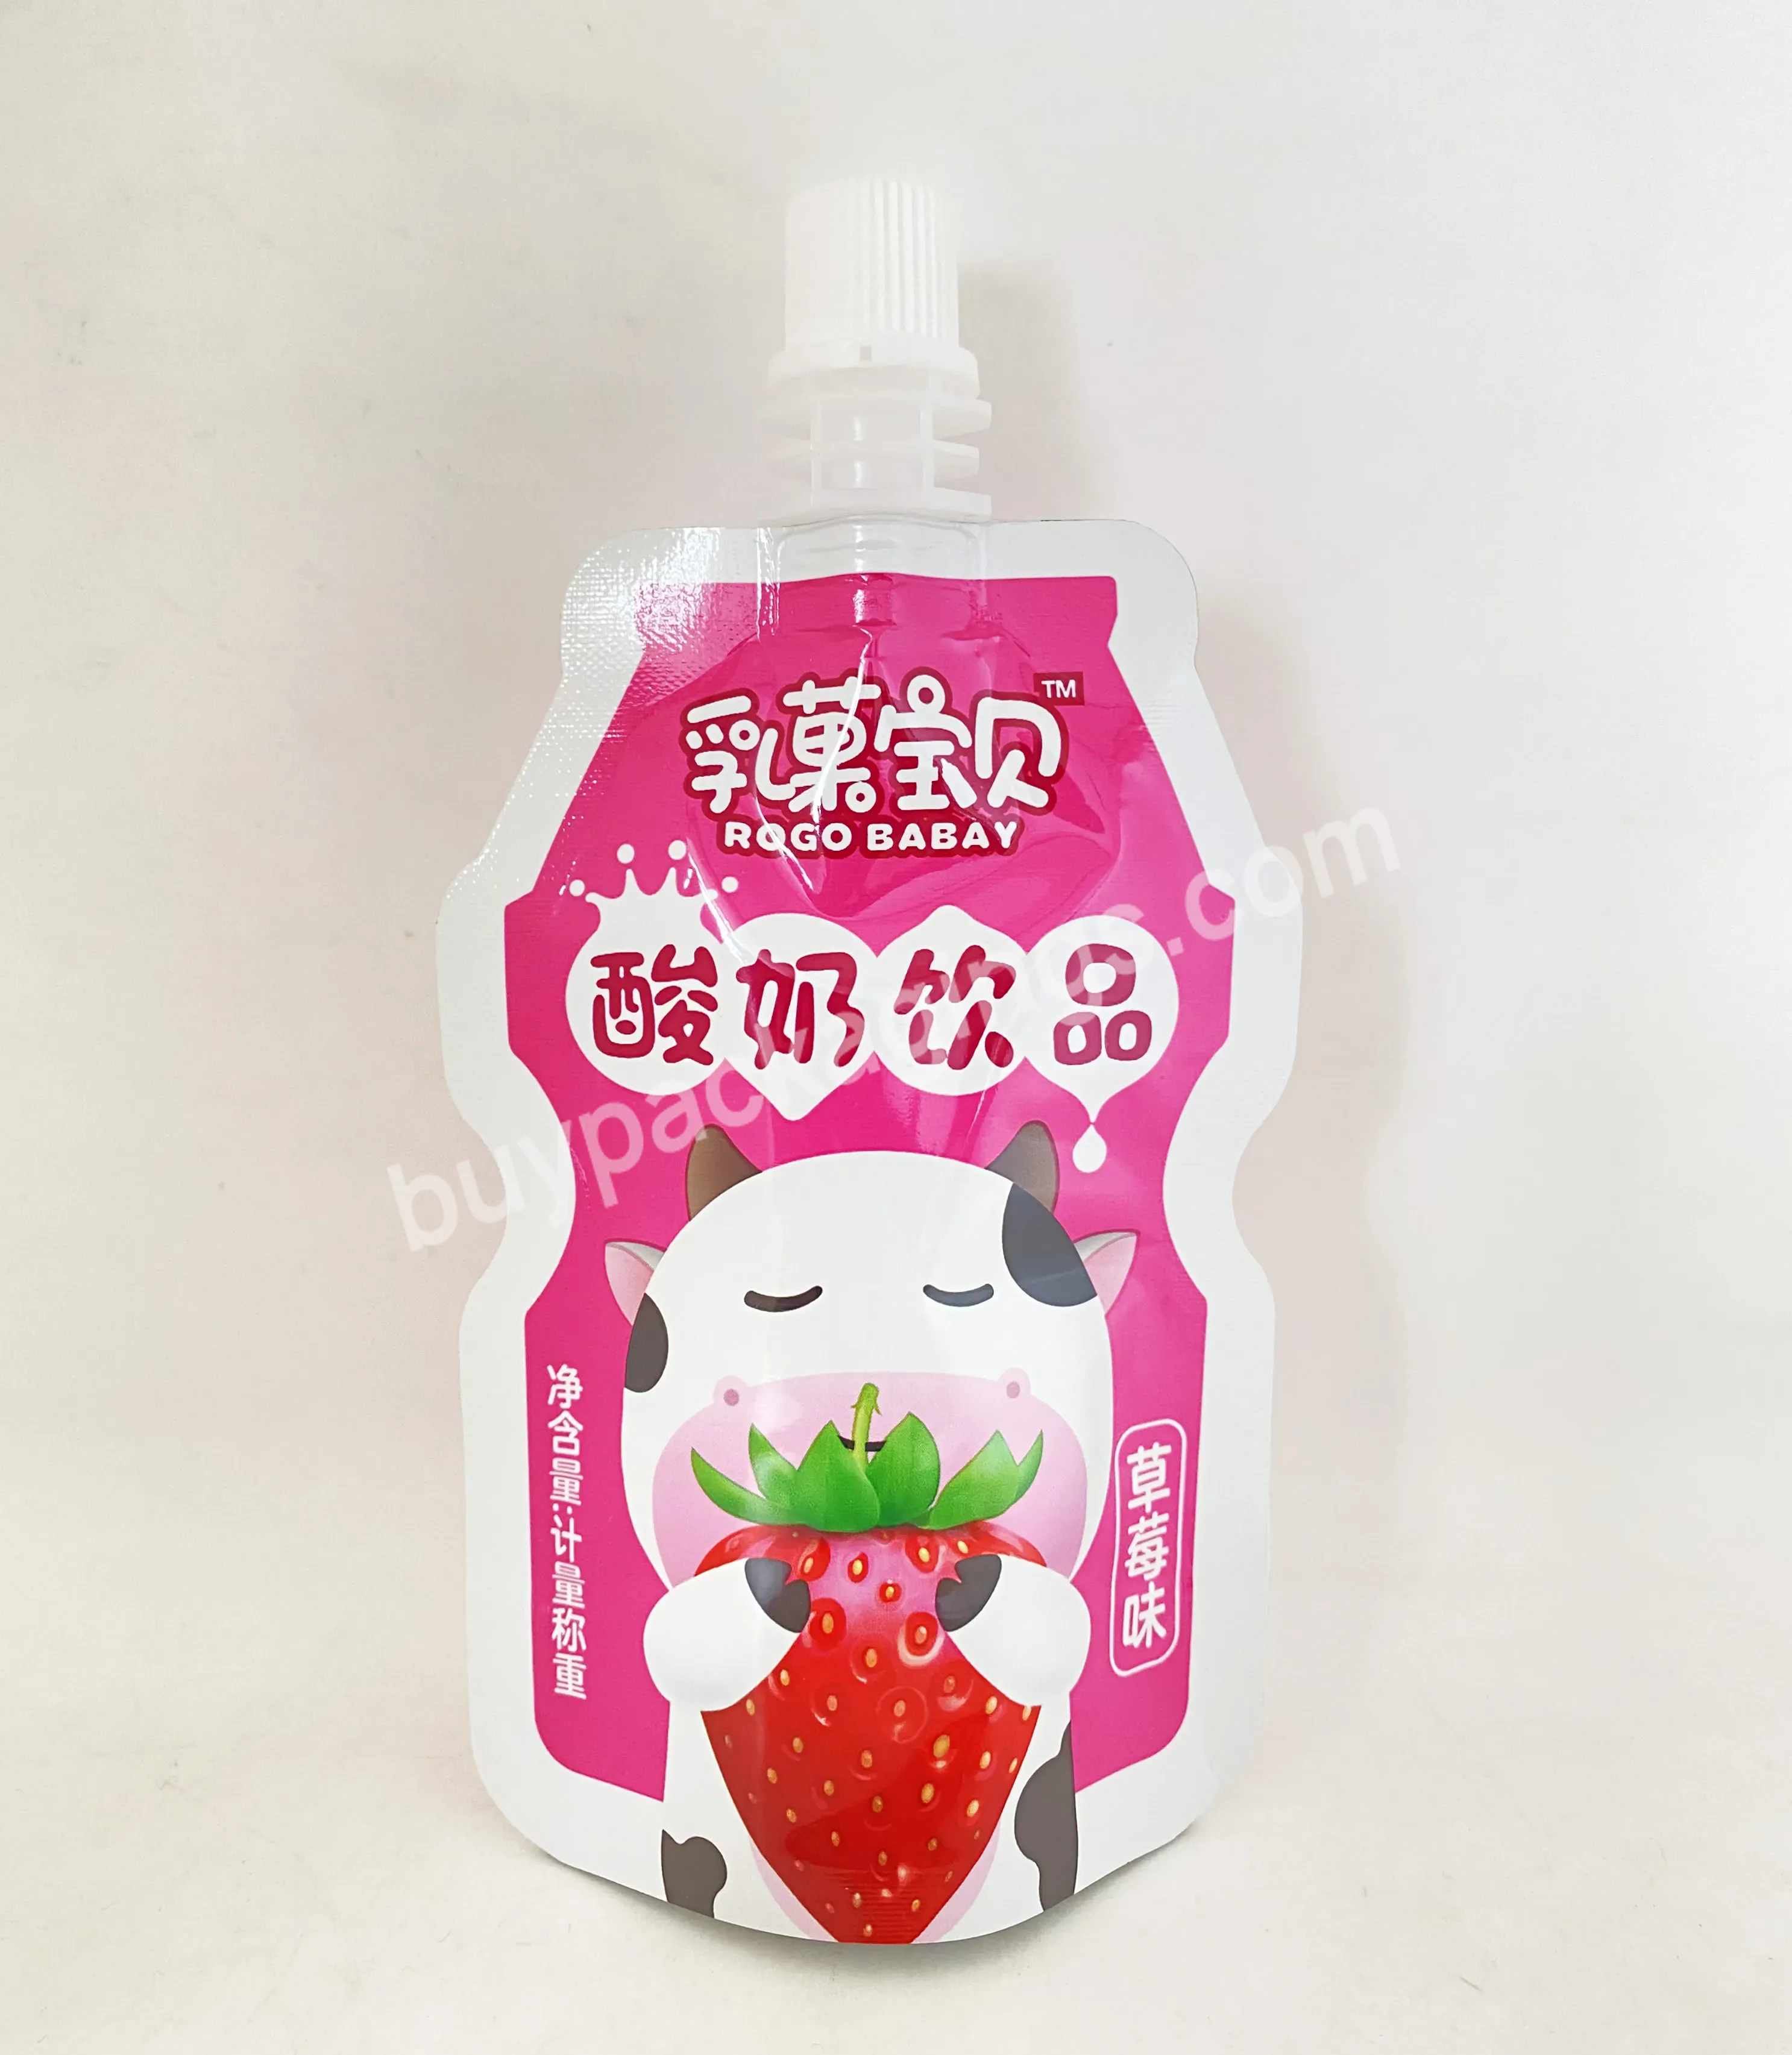 Custom Gravure Printing Stand-up Spout Pouch For Beverage Liquid Milk Fruit Drink Juice Plastic Packing Bag